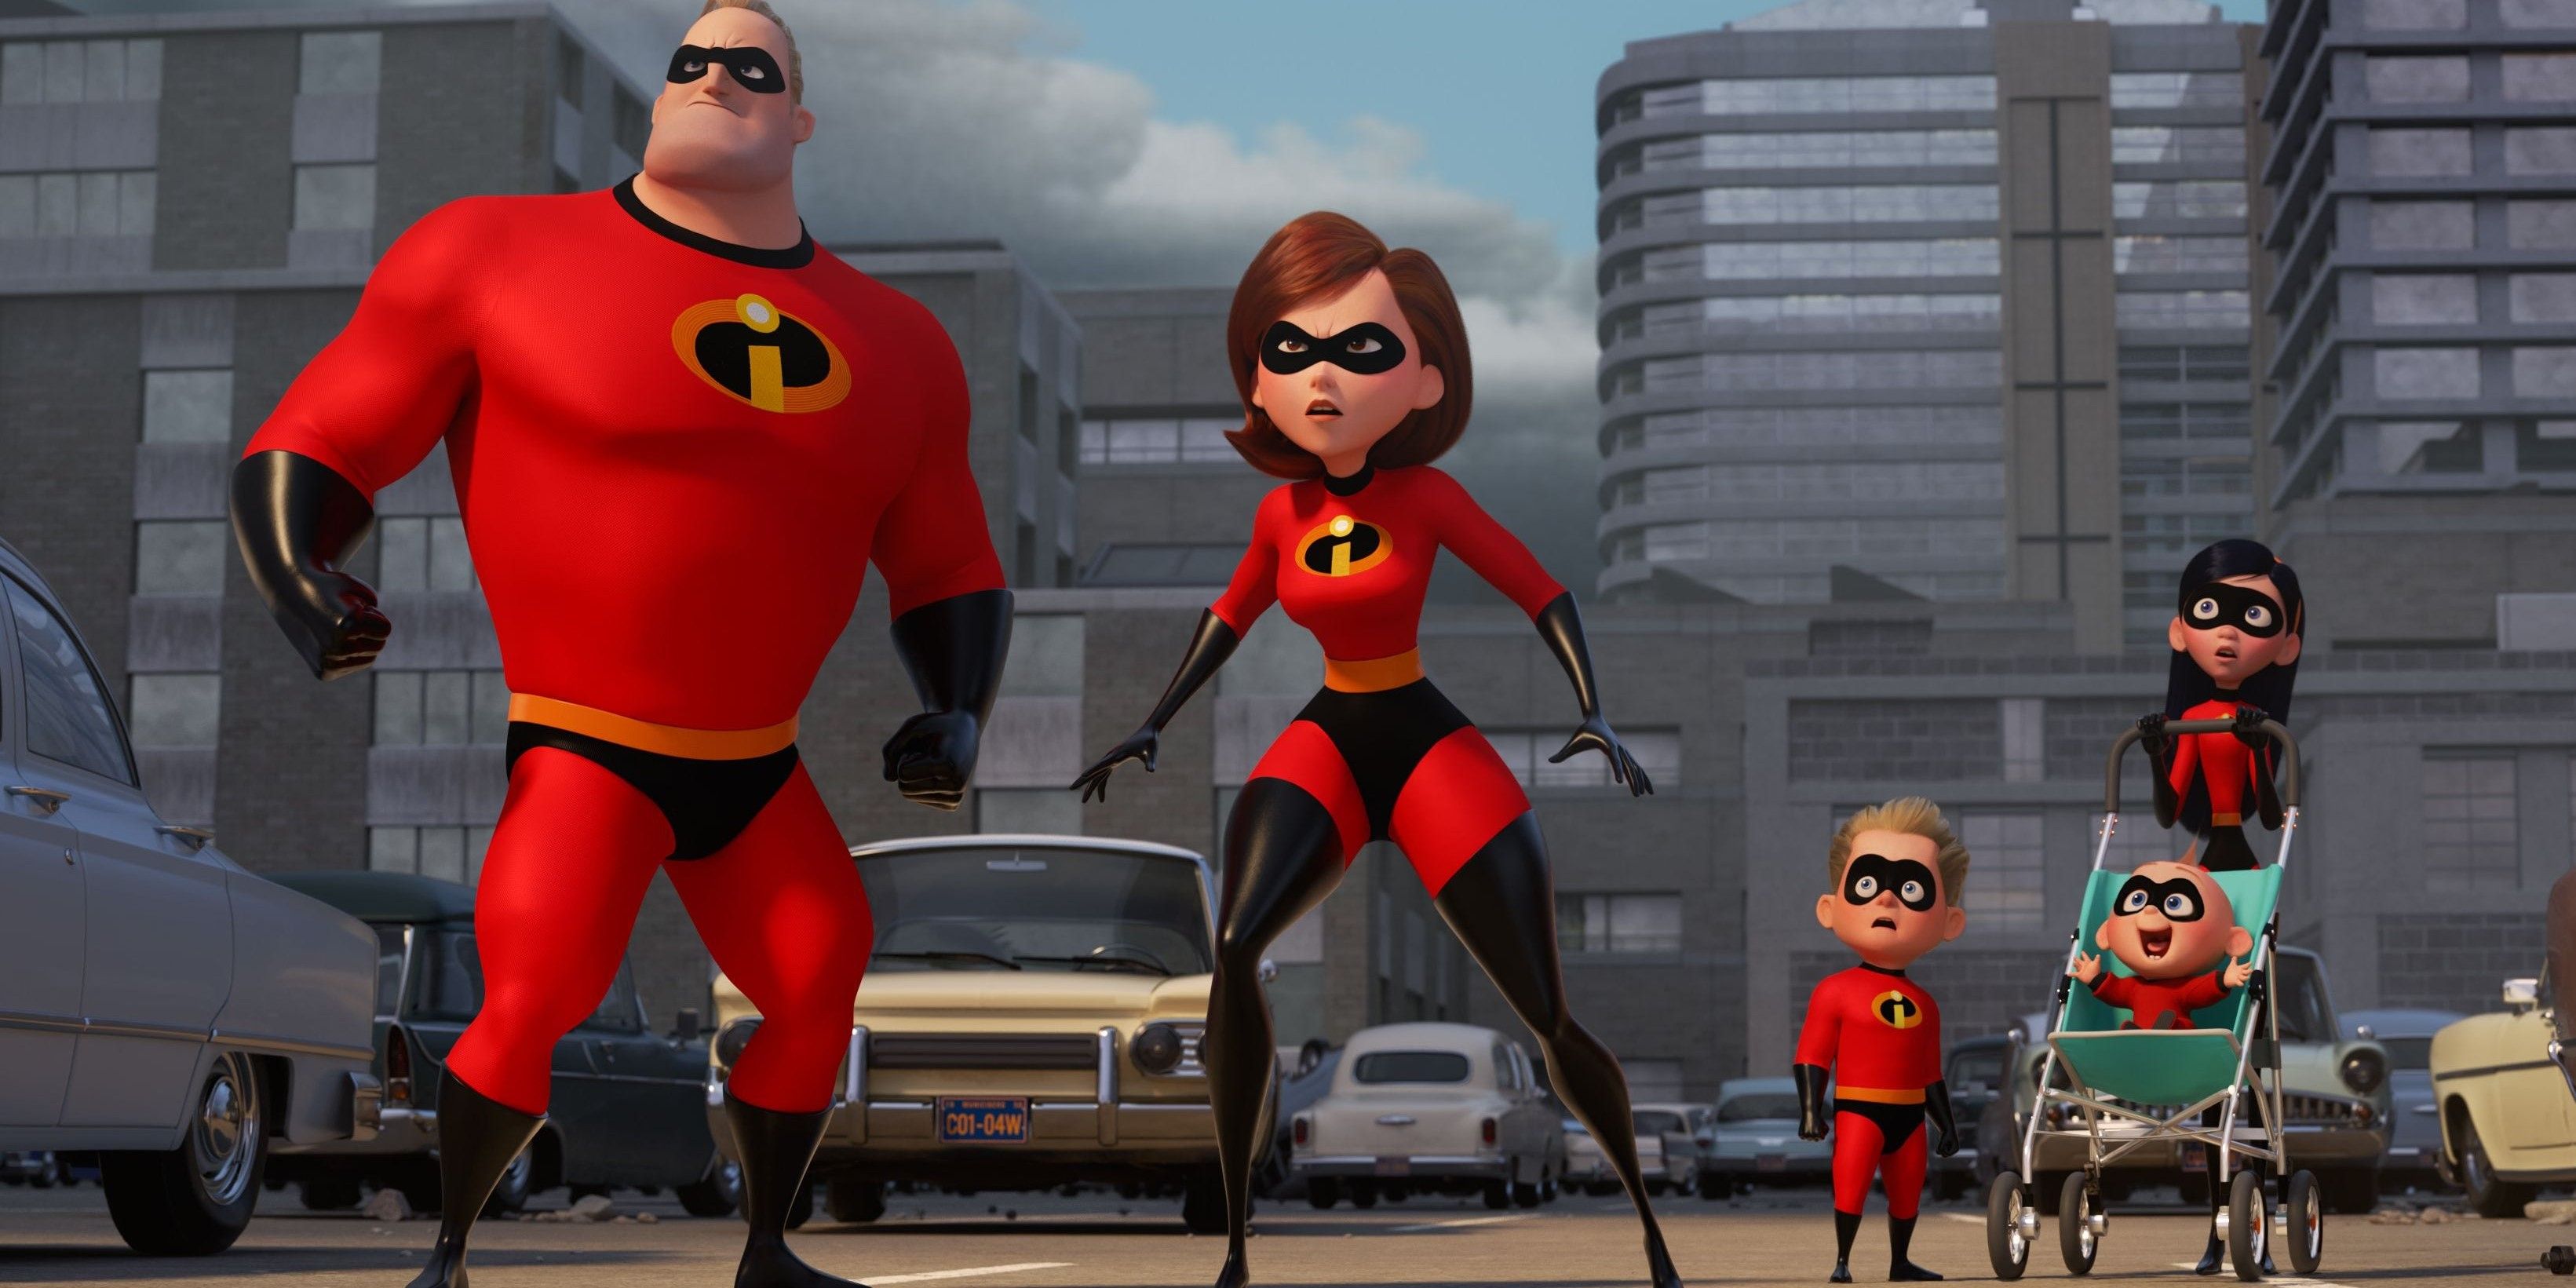 Mr. and Mrs. Incredible stand with Dash and Violet behind them in Incredibles 2